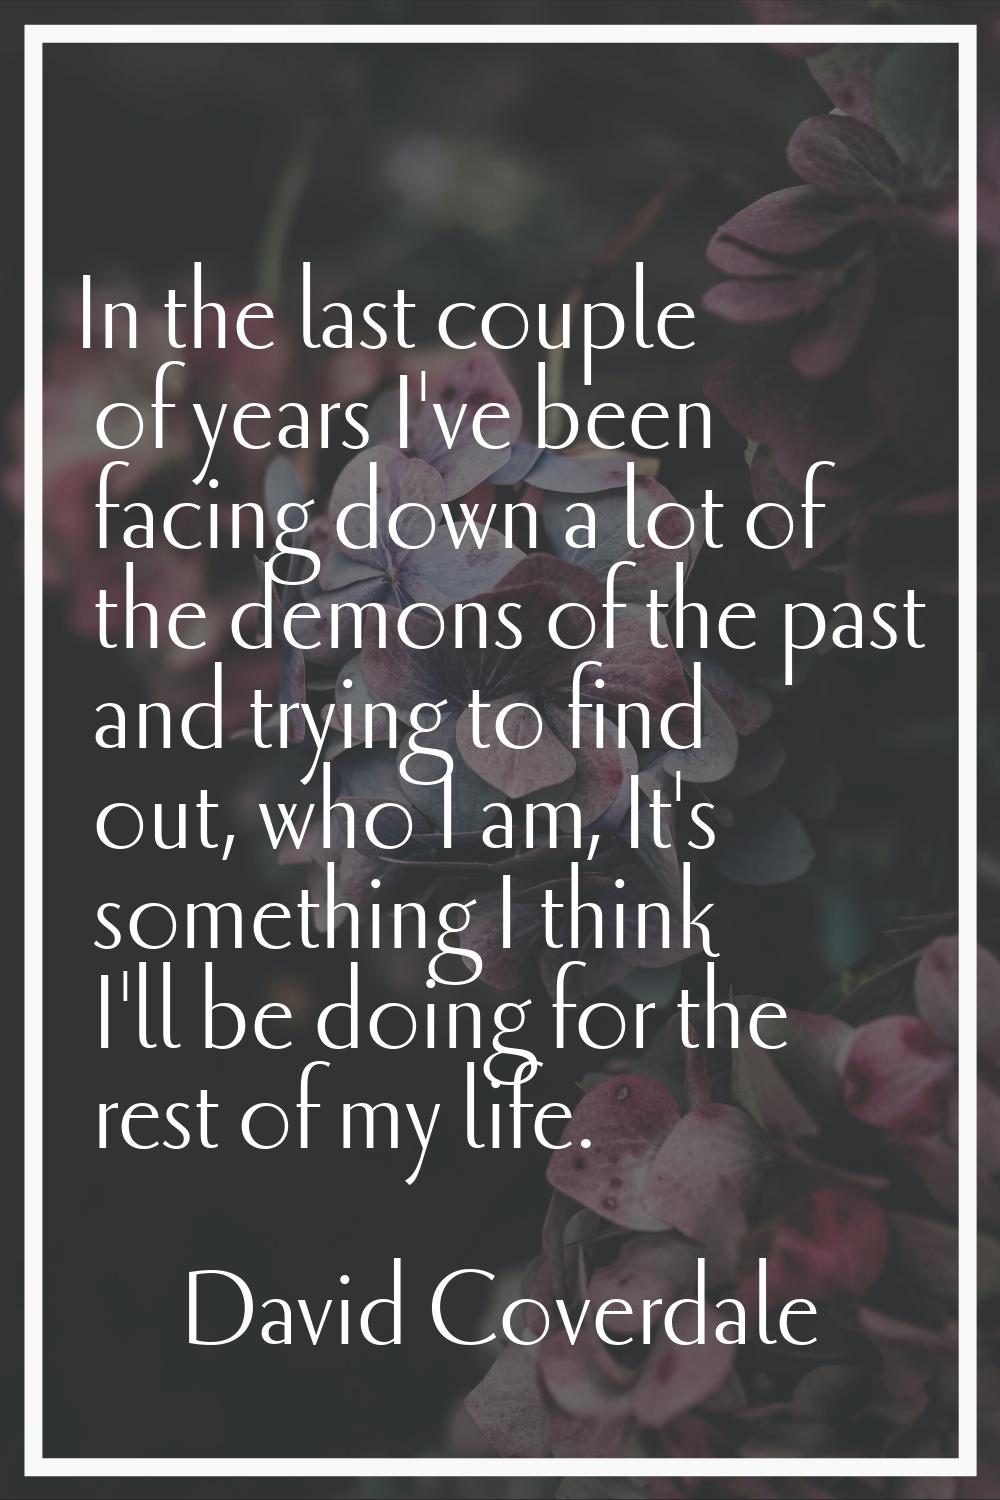 In the last couple of years I've been facing down a lot of the demons of the past and trying to fin